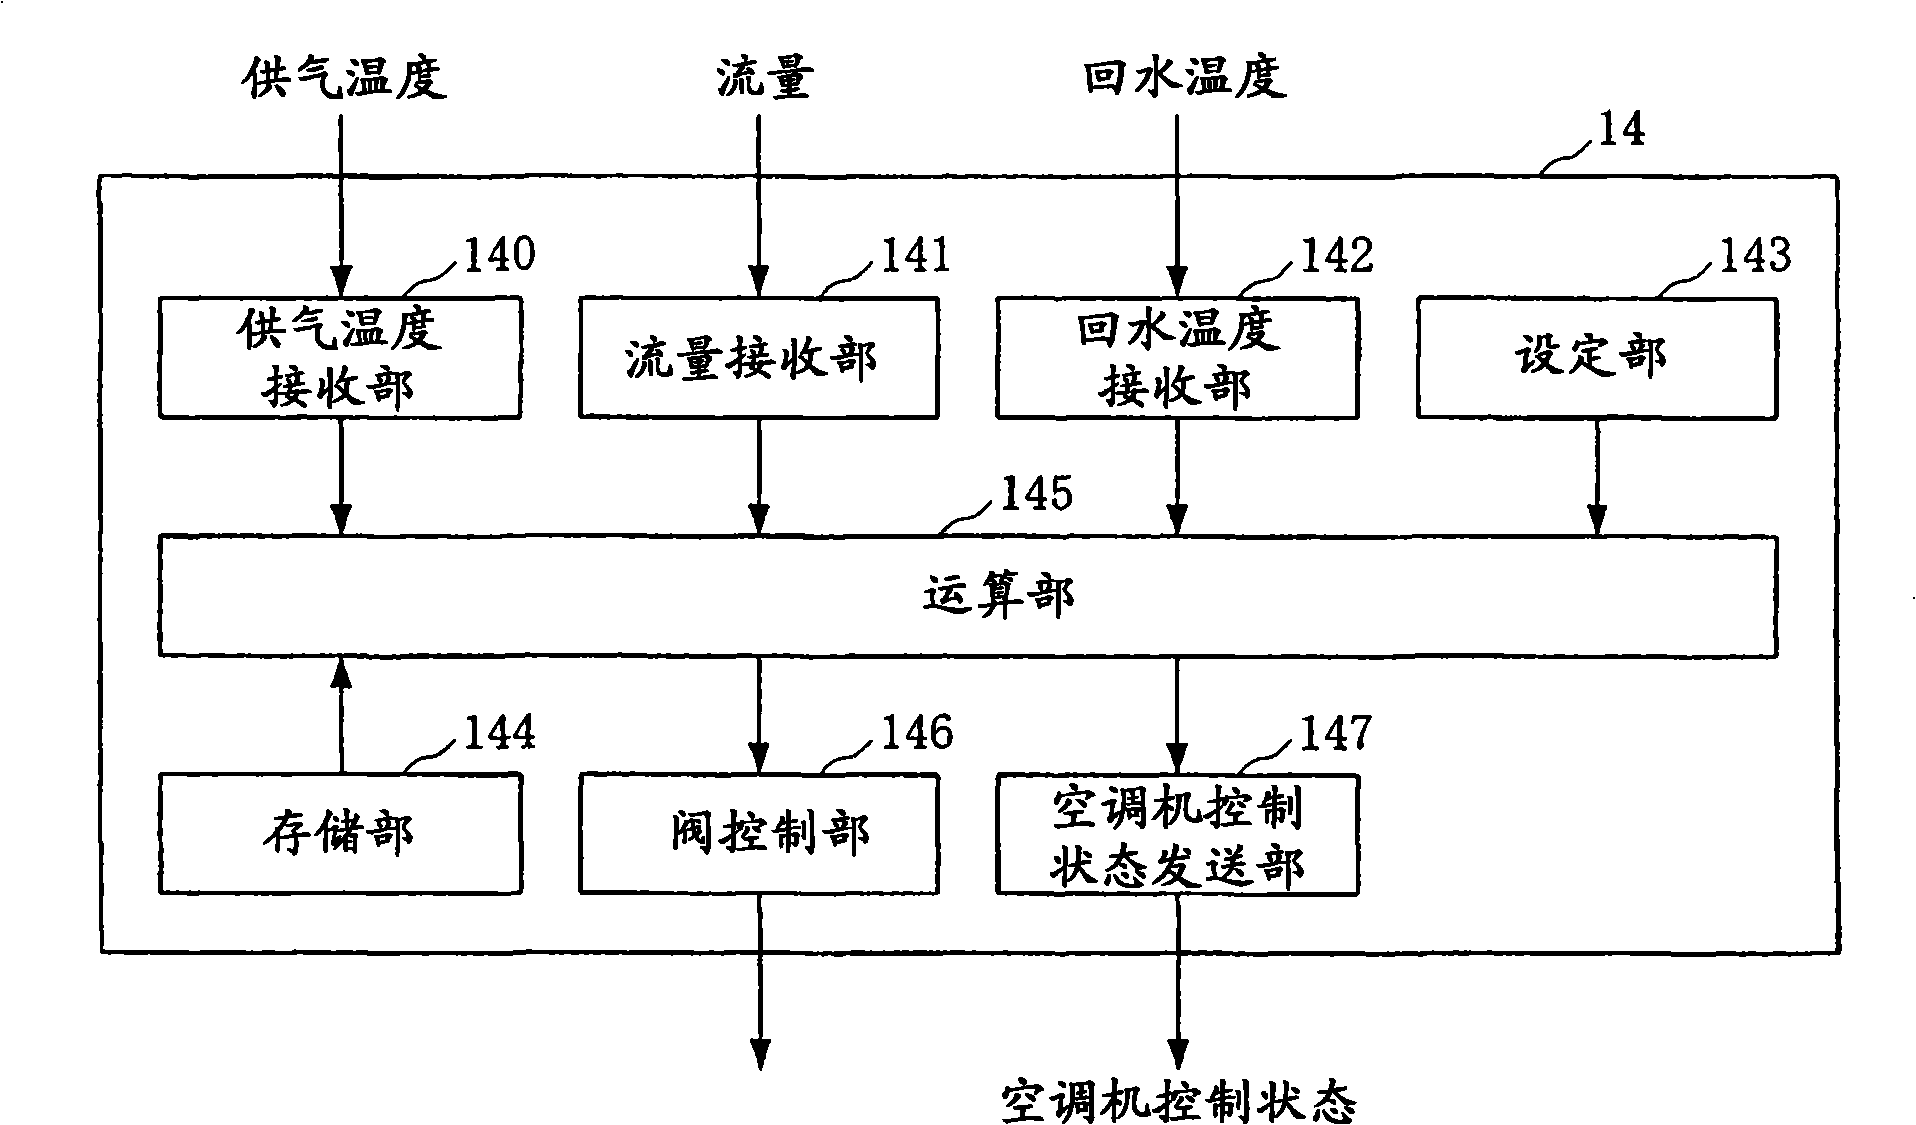 Air conditioner control system and method